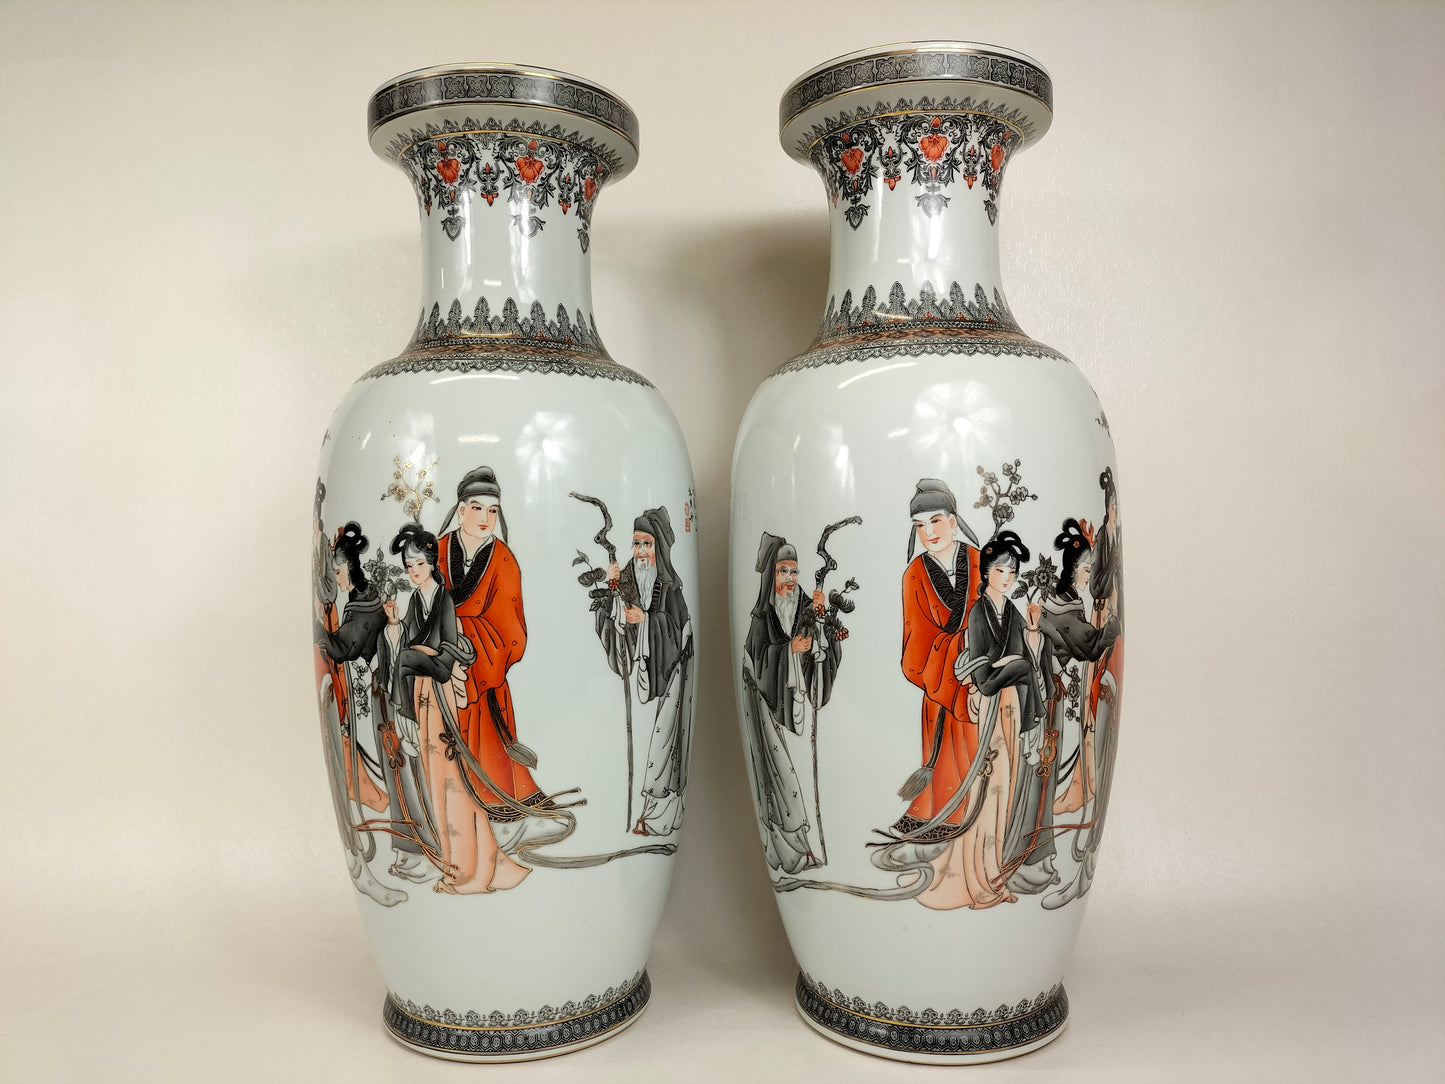 Pair of large Chinese vases decorated with figures // Jingdezhen - Qianlong mark - 20th century